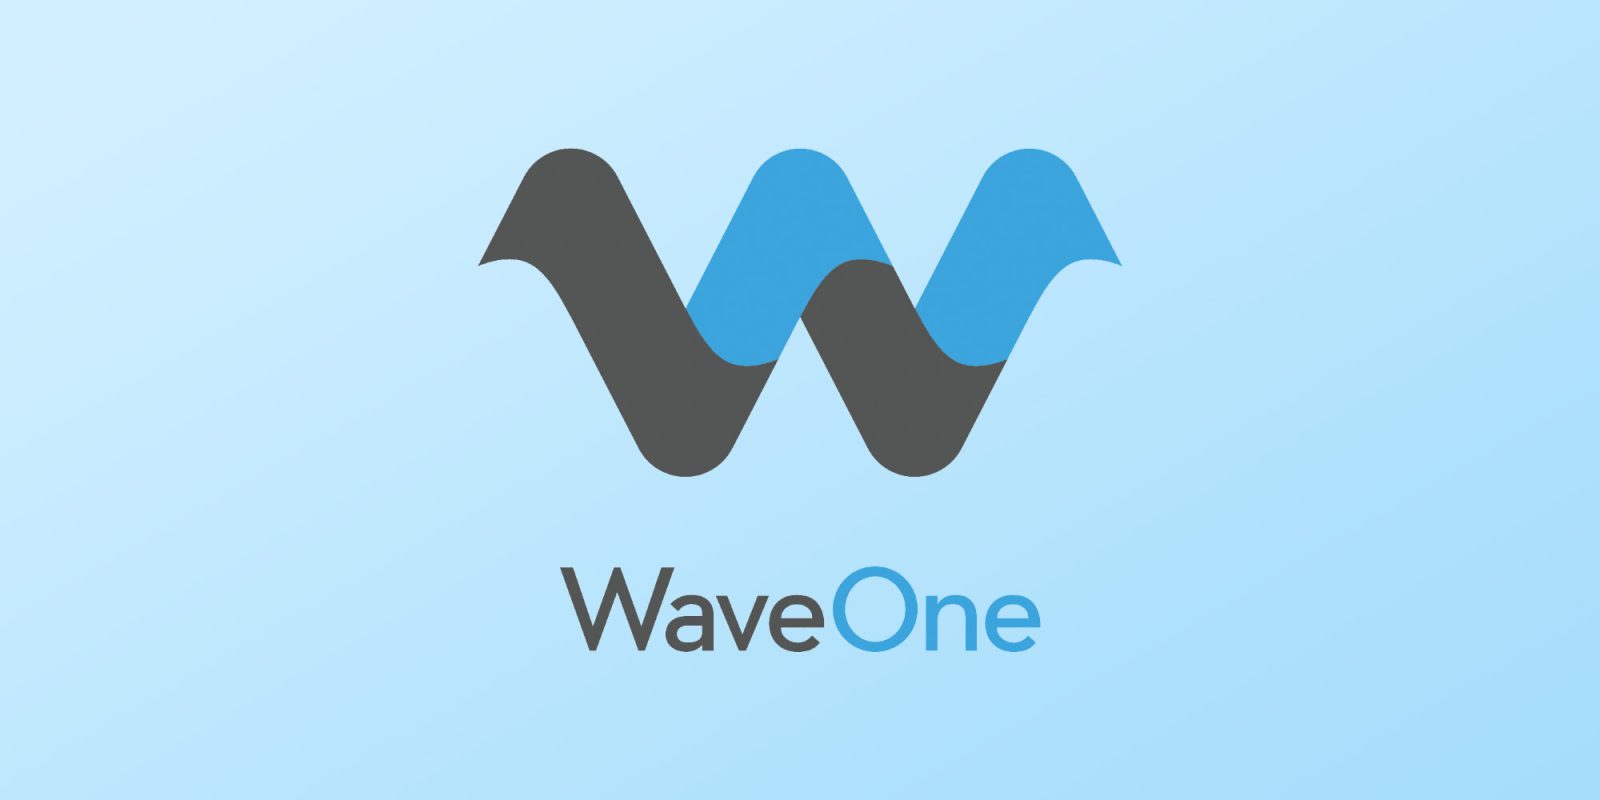 Apple bolsters its AI know-how with acquisition of WaveOne startup